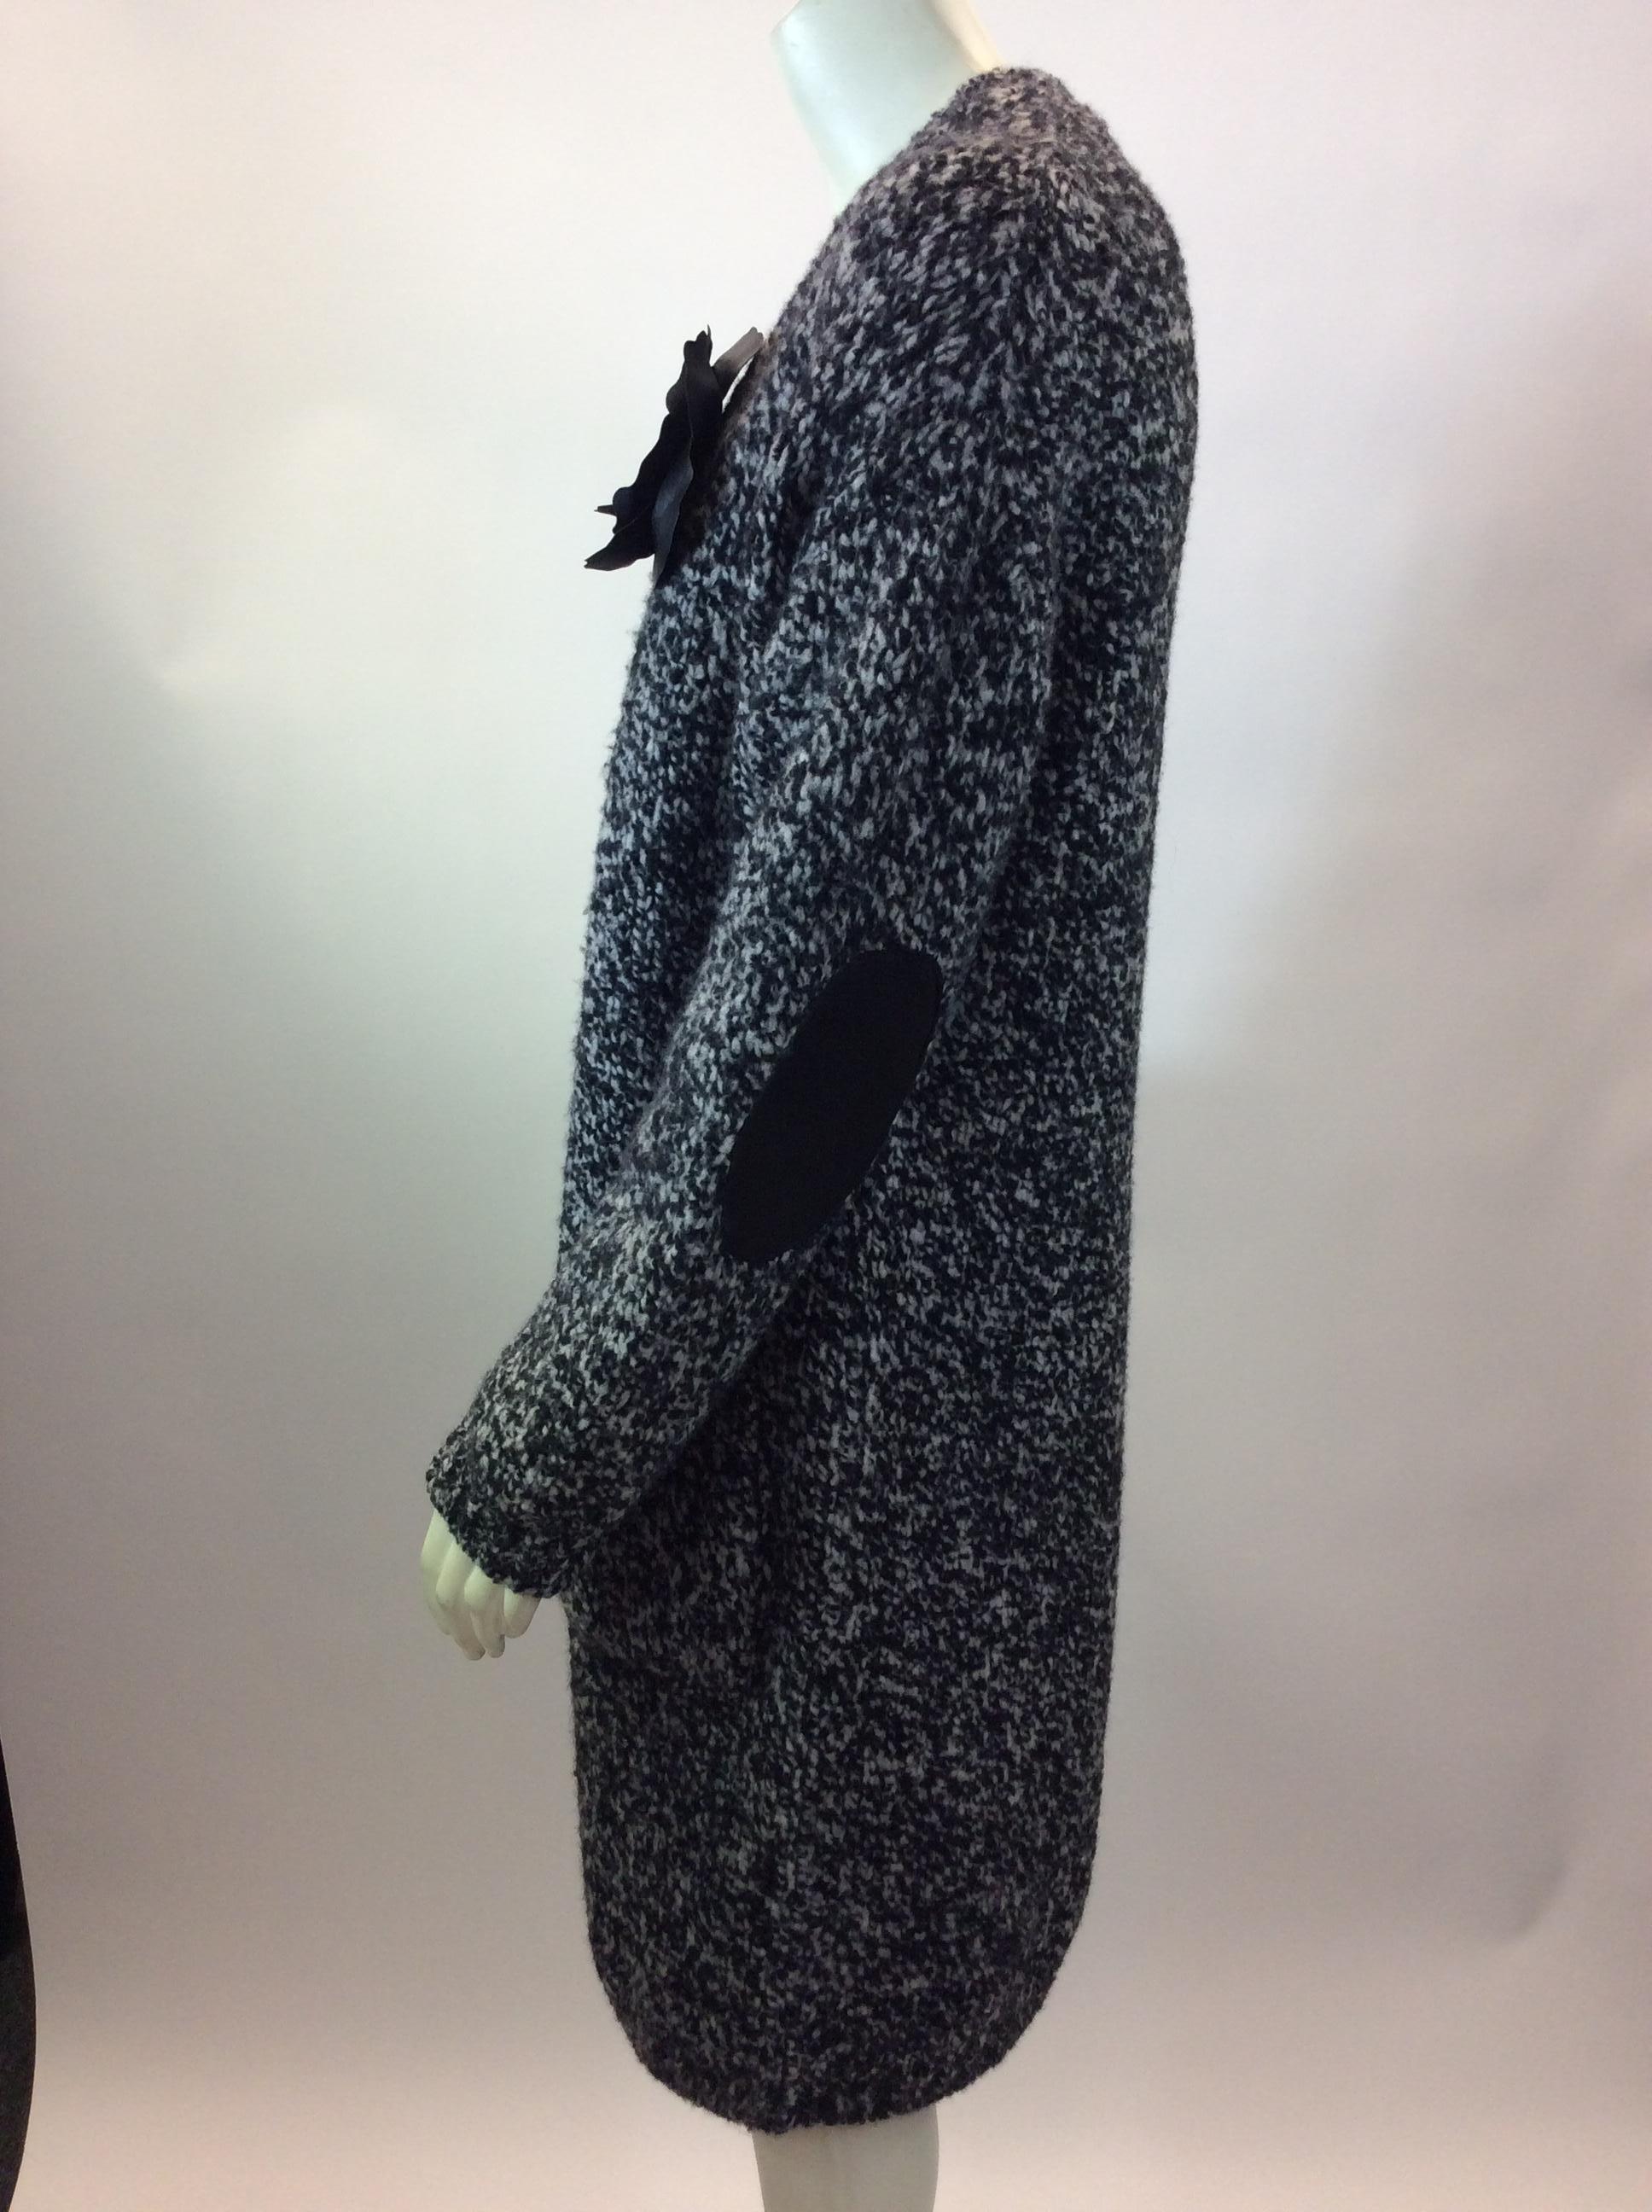 Twin Set Black and White Cardigan with Flower
$199
Made in Italy
85% wool, 13% nylon, 2% elastane
Size small
Length 39